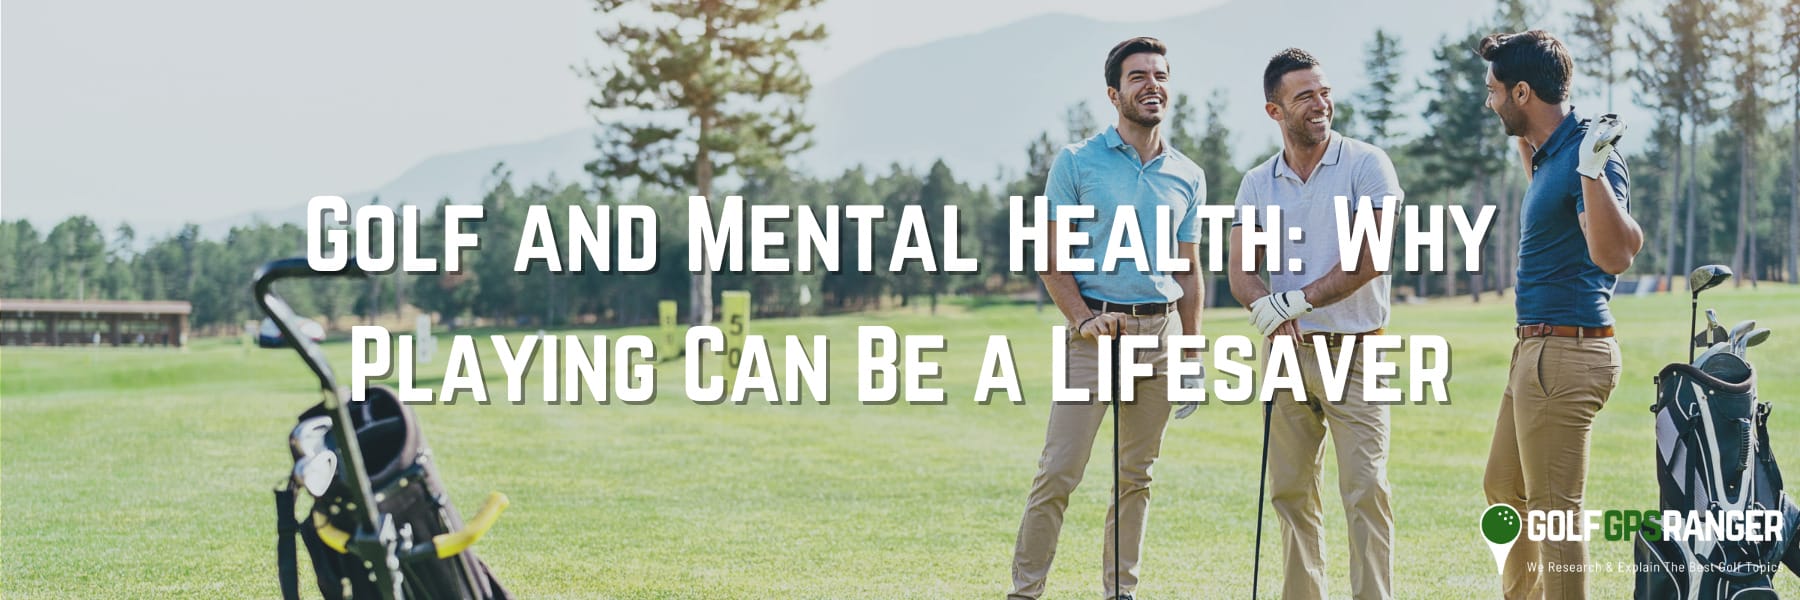 Golf and Mental Health Why Playing Can Be a Lifesaver